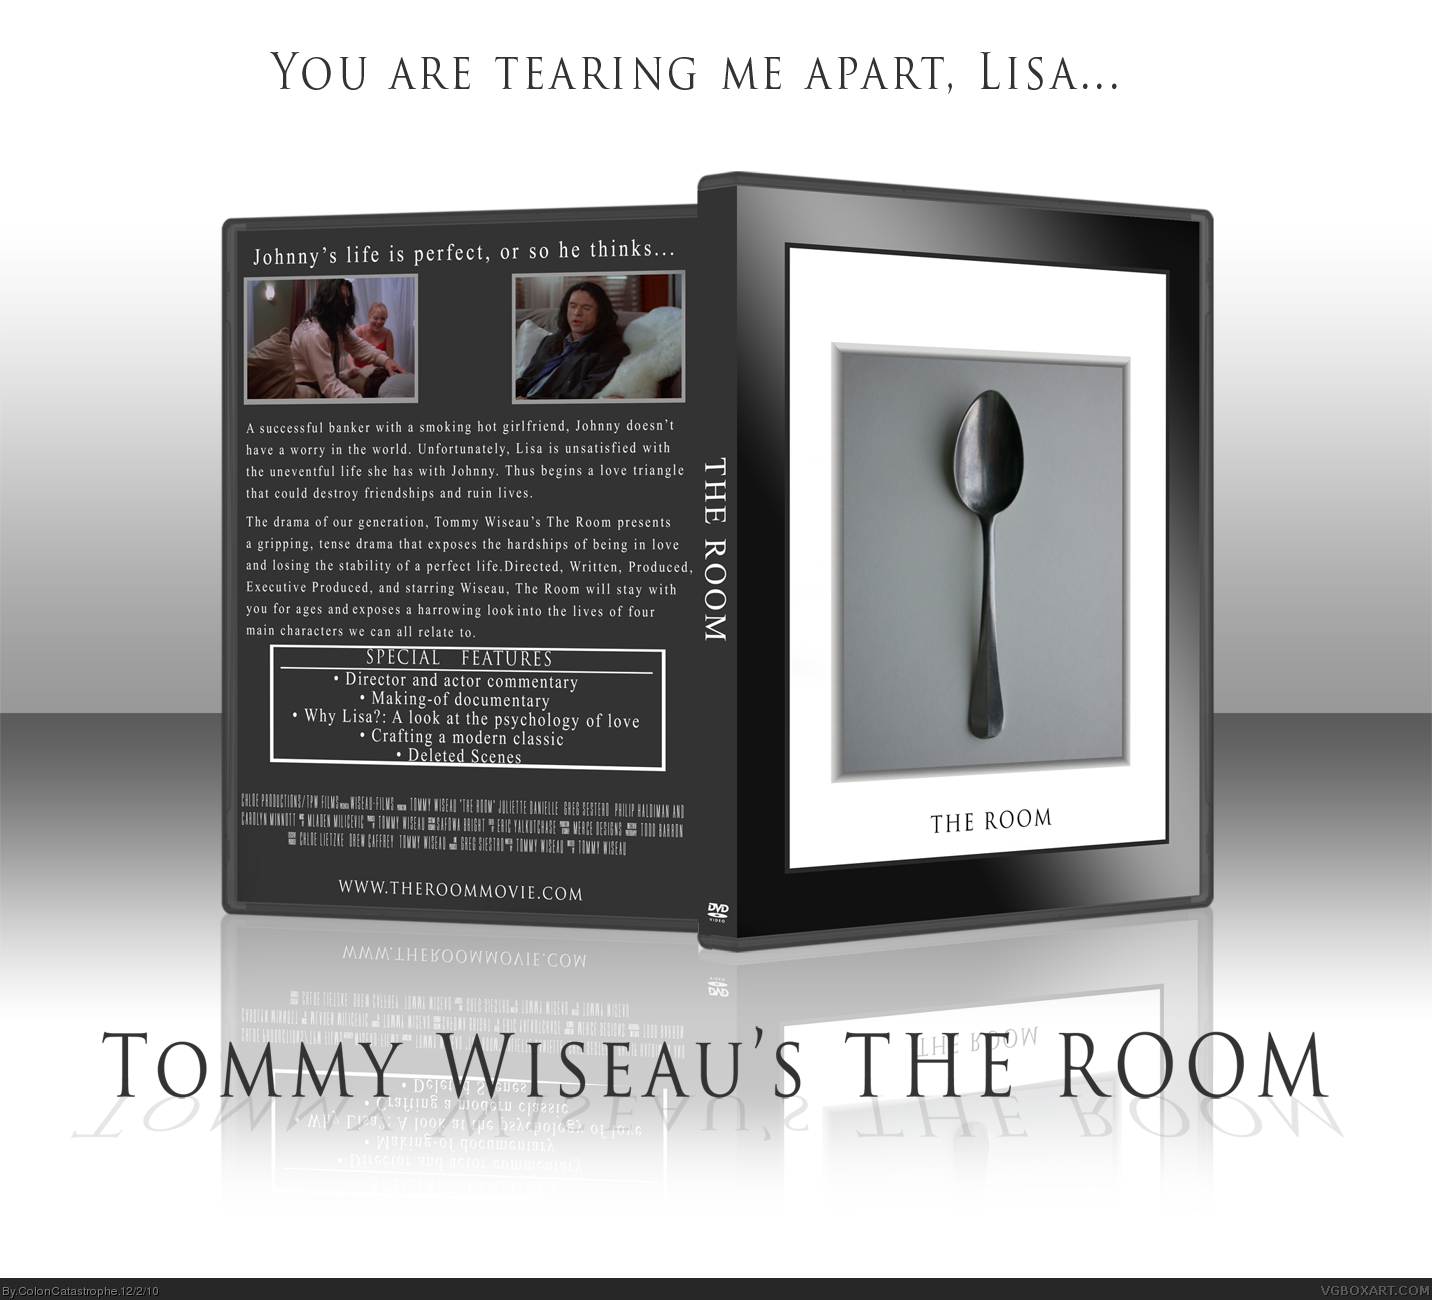 The Room box cover